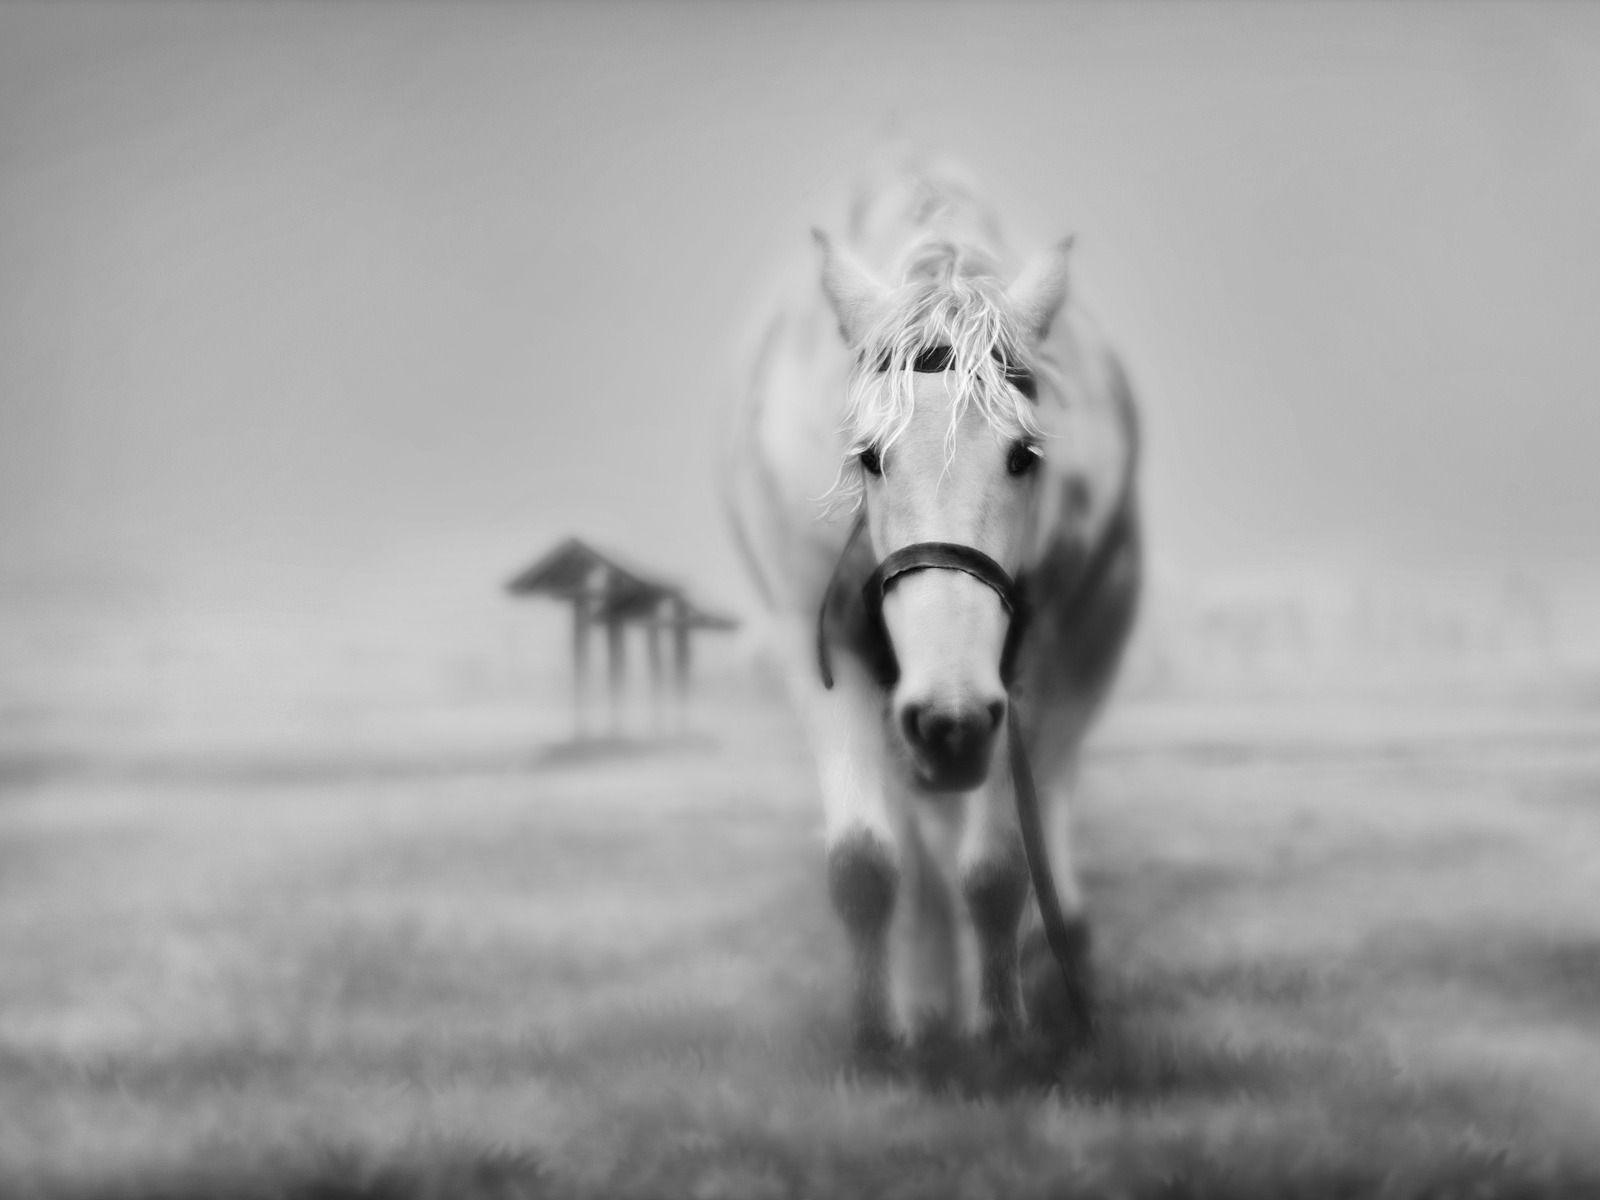 Horse wallpaper wallpaper for free download about (020) wallpaper